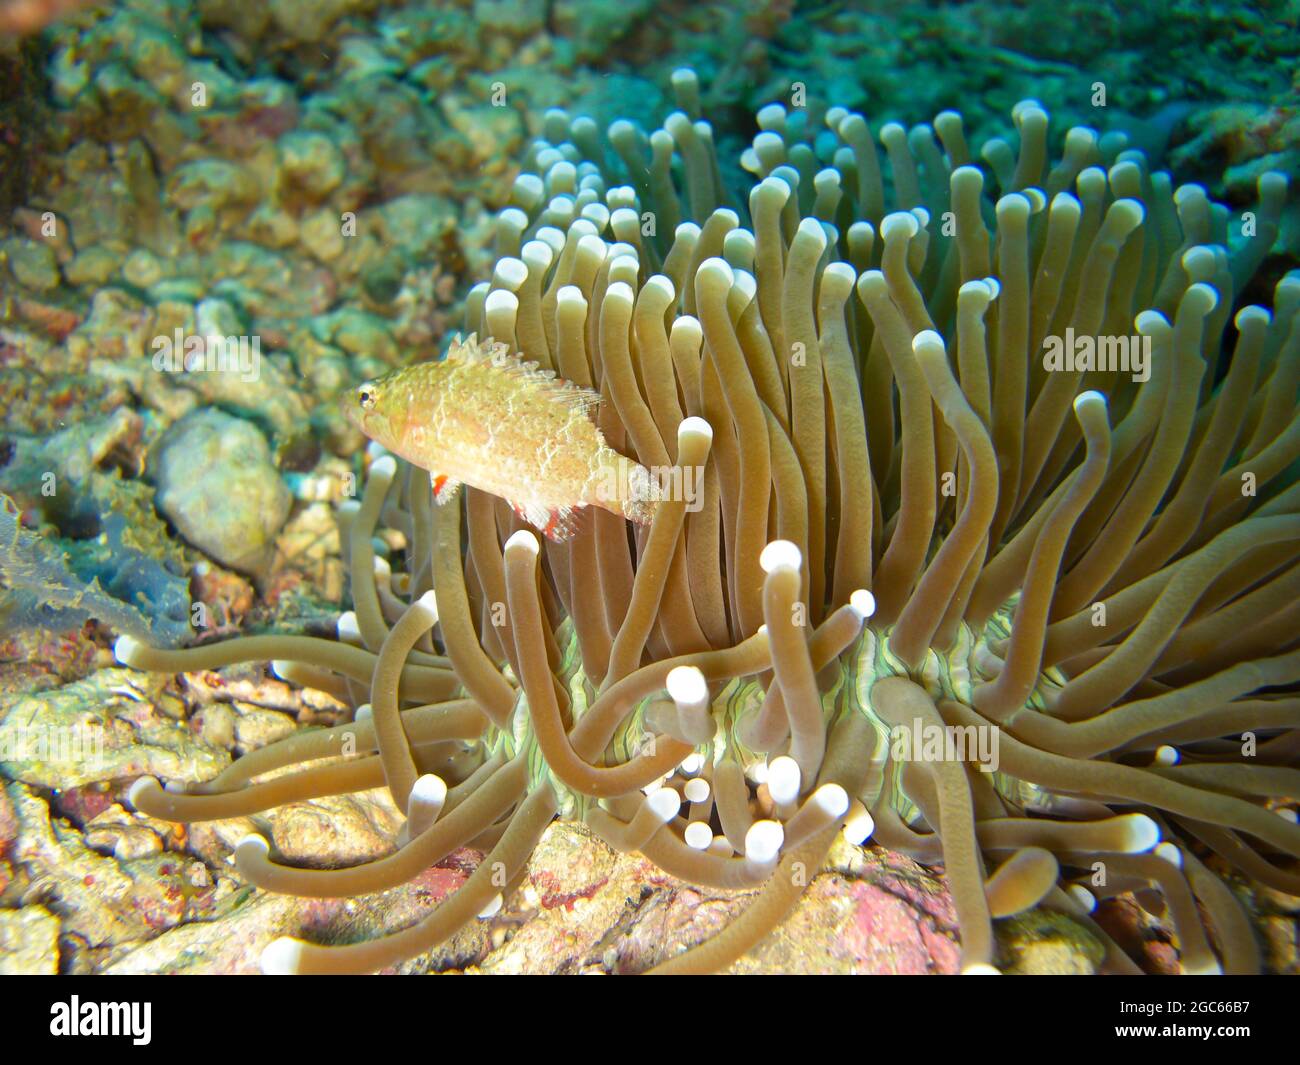 Unknown Fish swims at an Anemone in the filipino sea 7.11.2012 Stock Photo